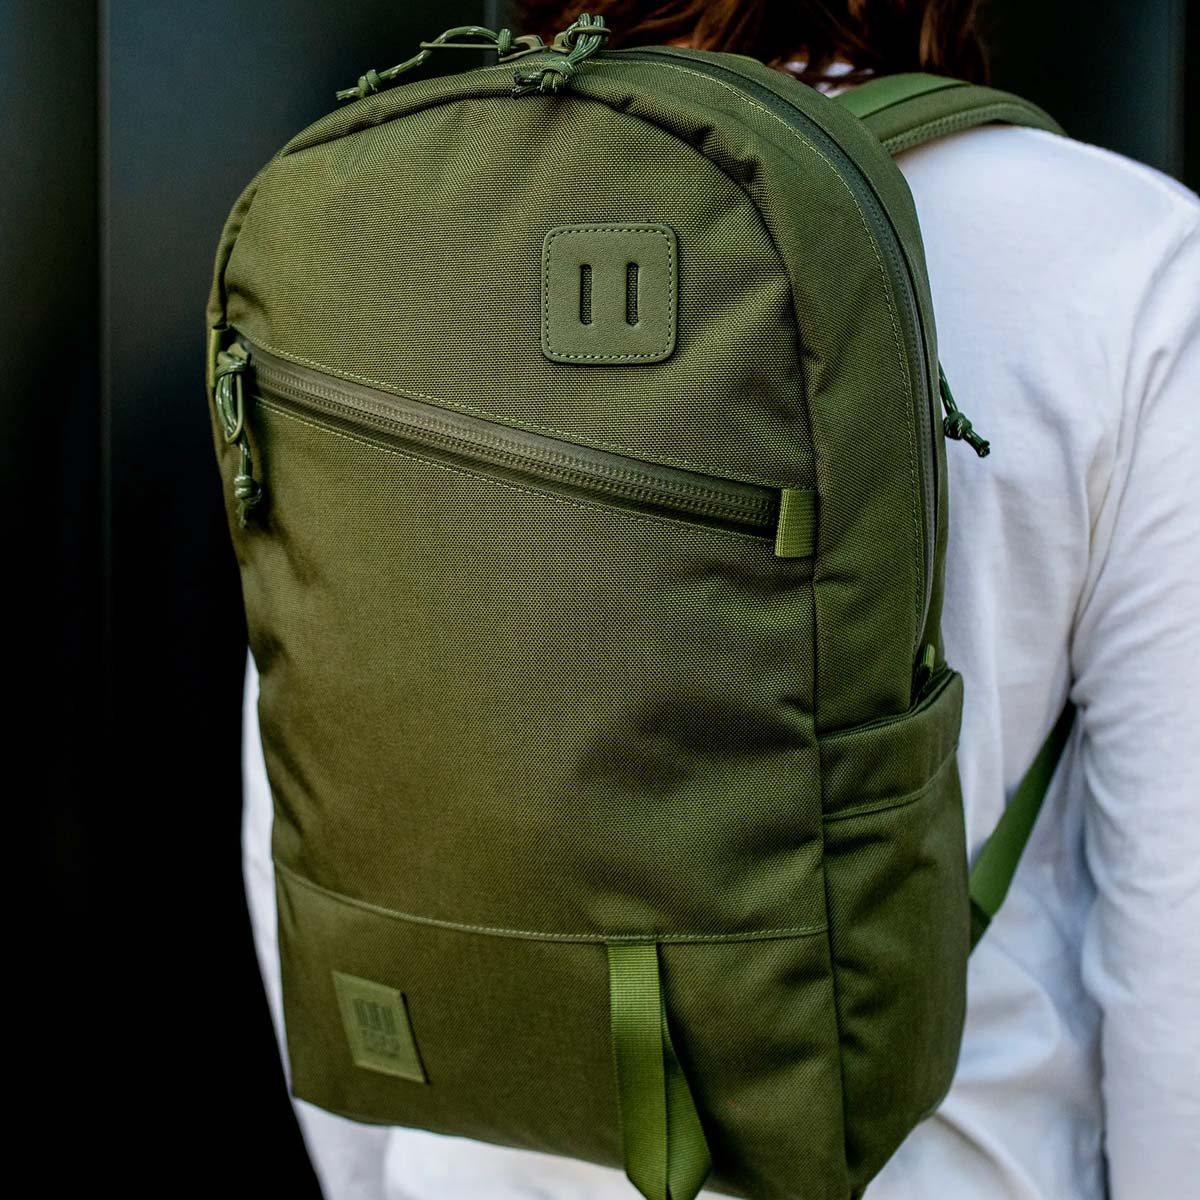 Topo Designs Daypack Tech Olive, stylish and functional pack, ideal travel companion, schoolmate or pack mule